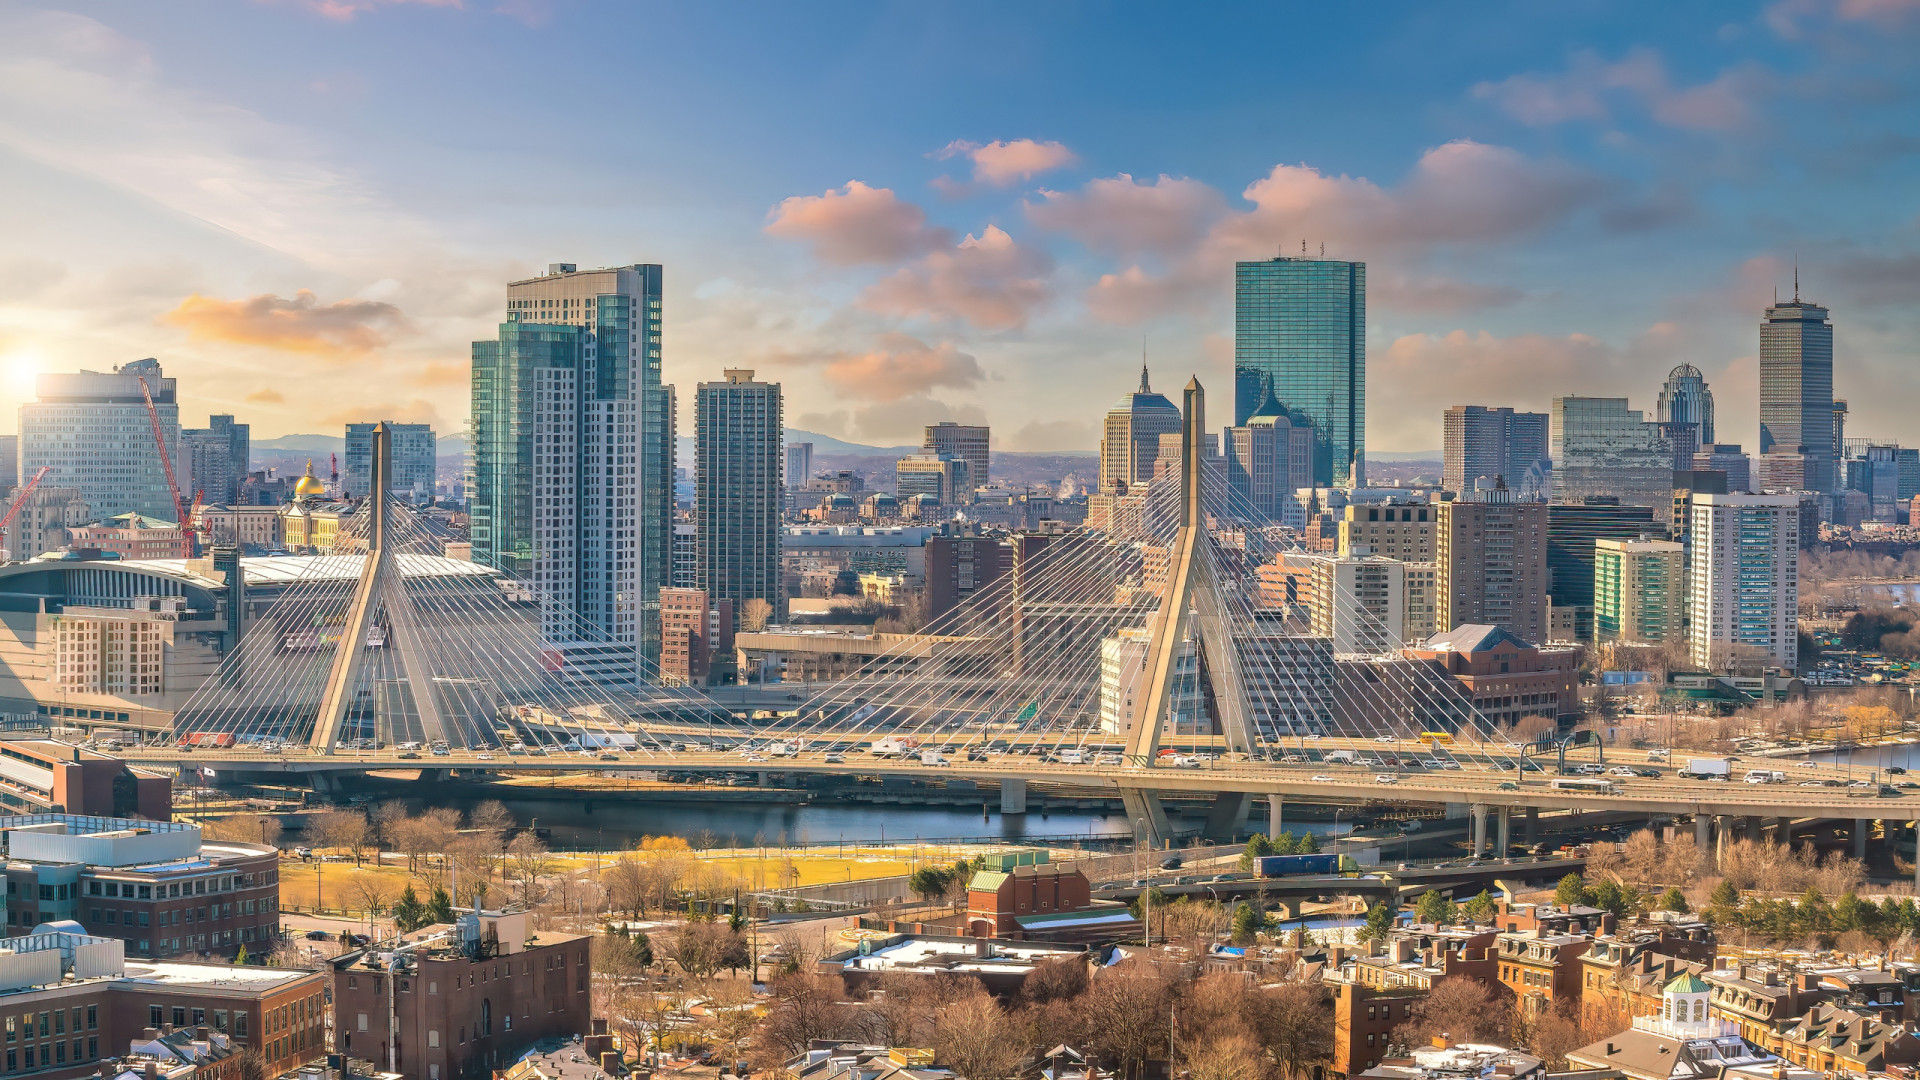 <p>One of the oldest cities in the US arrives in 19th place. The city of Boston has been practically brimming with culture and history since its foundation in 1630, and businesses in the city rank among the top in the country for environmental sustainability.</p><p><a href="https://www.msn.com/en-us/community/channel/vid-7xx8mnucu55yw63we9va2gwr7uihbxwc68fxqp25x6tg4ftibpra?cvid=94631541bc0f4f89bfd59158d696ad7e">Follow us and access great exclusive content every day</a></p>